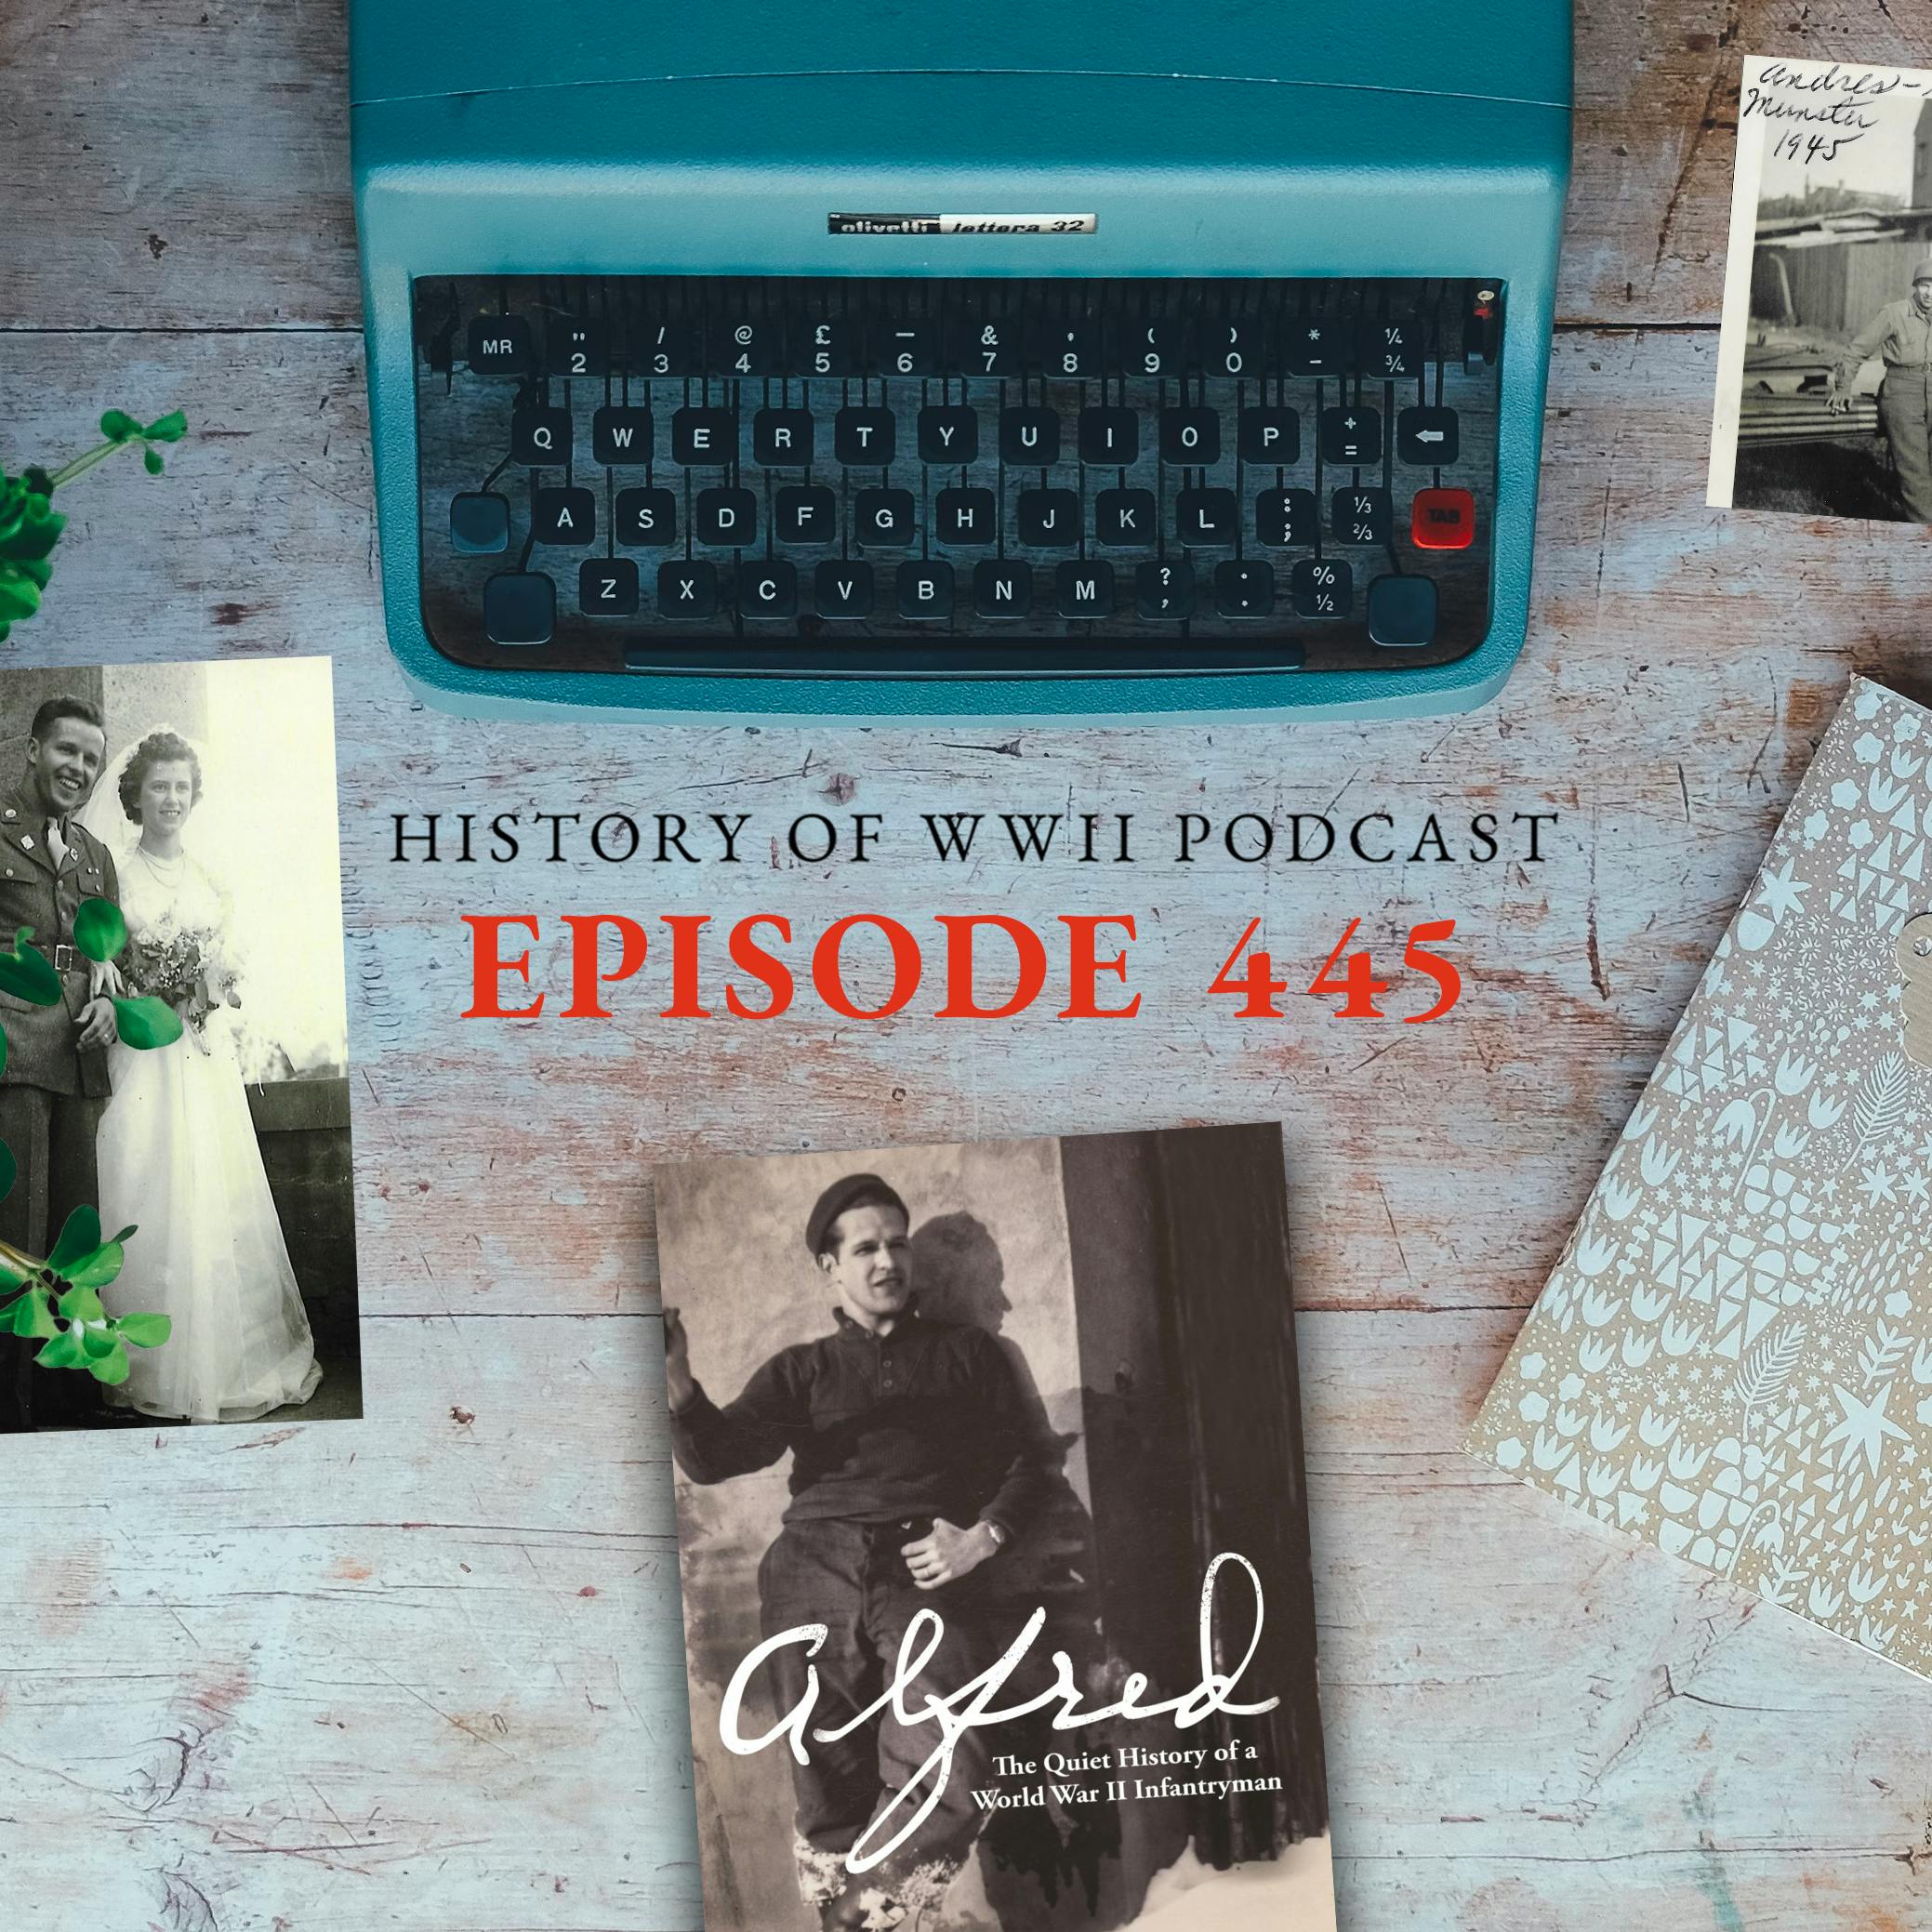 Episode 445-Interview w/ Louise Endres Moore about her book Alfred:The Quiet History of a WWII Infantryman